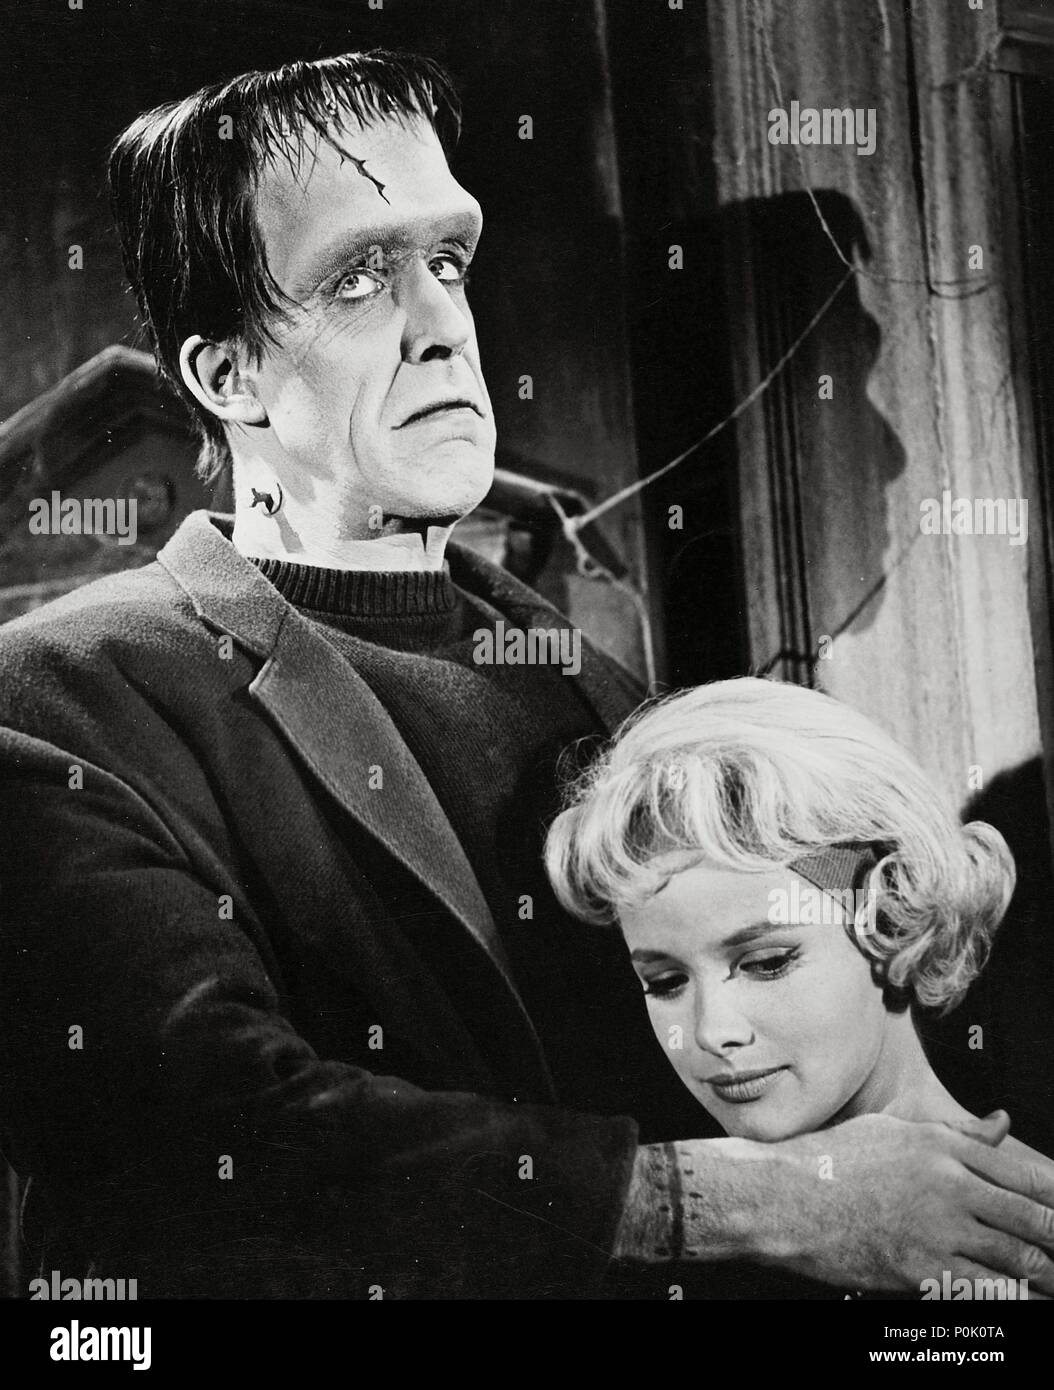 Original Film Title: THE MUNSTERS.  English Title: THE MUNSTERS.  Year: 1964.  Stars: FRED GWYNNE; BEVERLEY OWEN. Credit: CBS/MCA/UNIVERSAL / Album Stock Photo